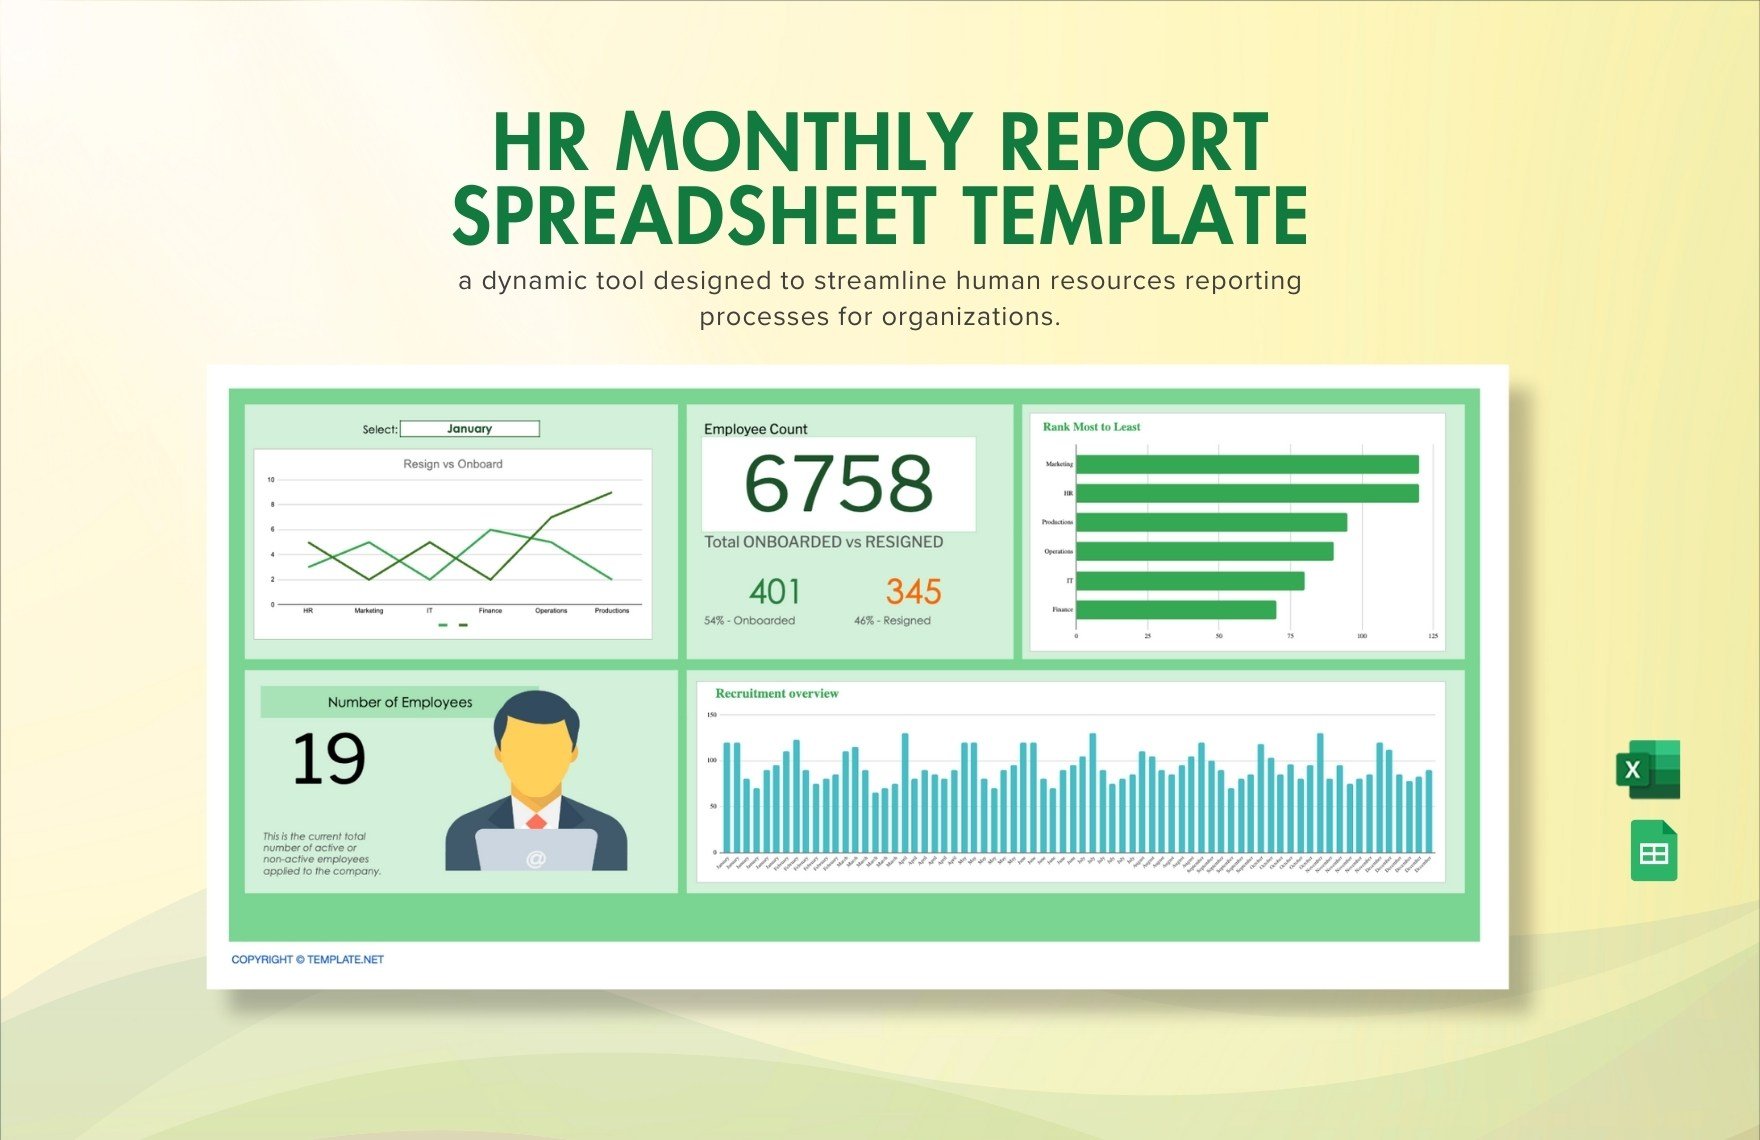 HR Monthly Report Spreadsheet Template